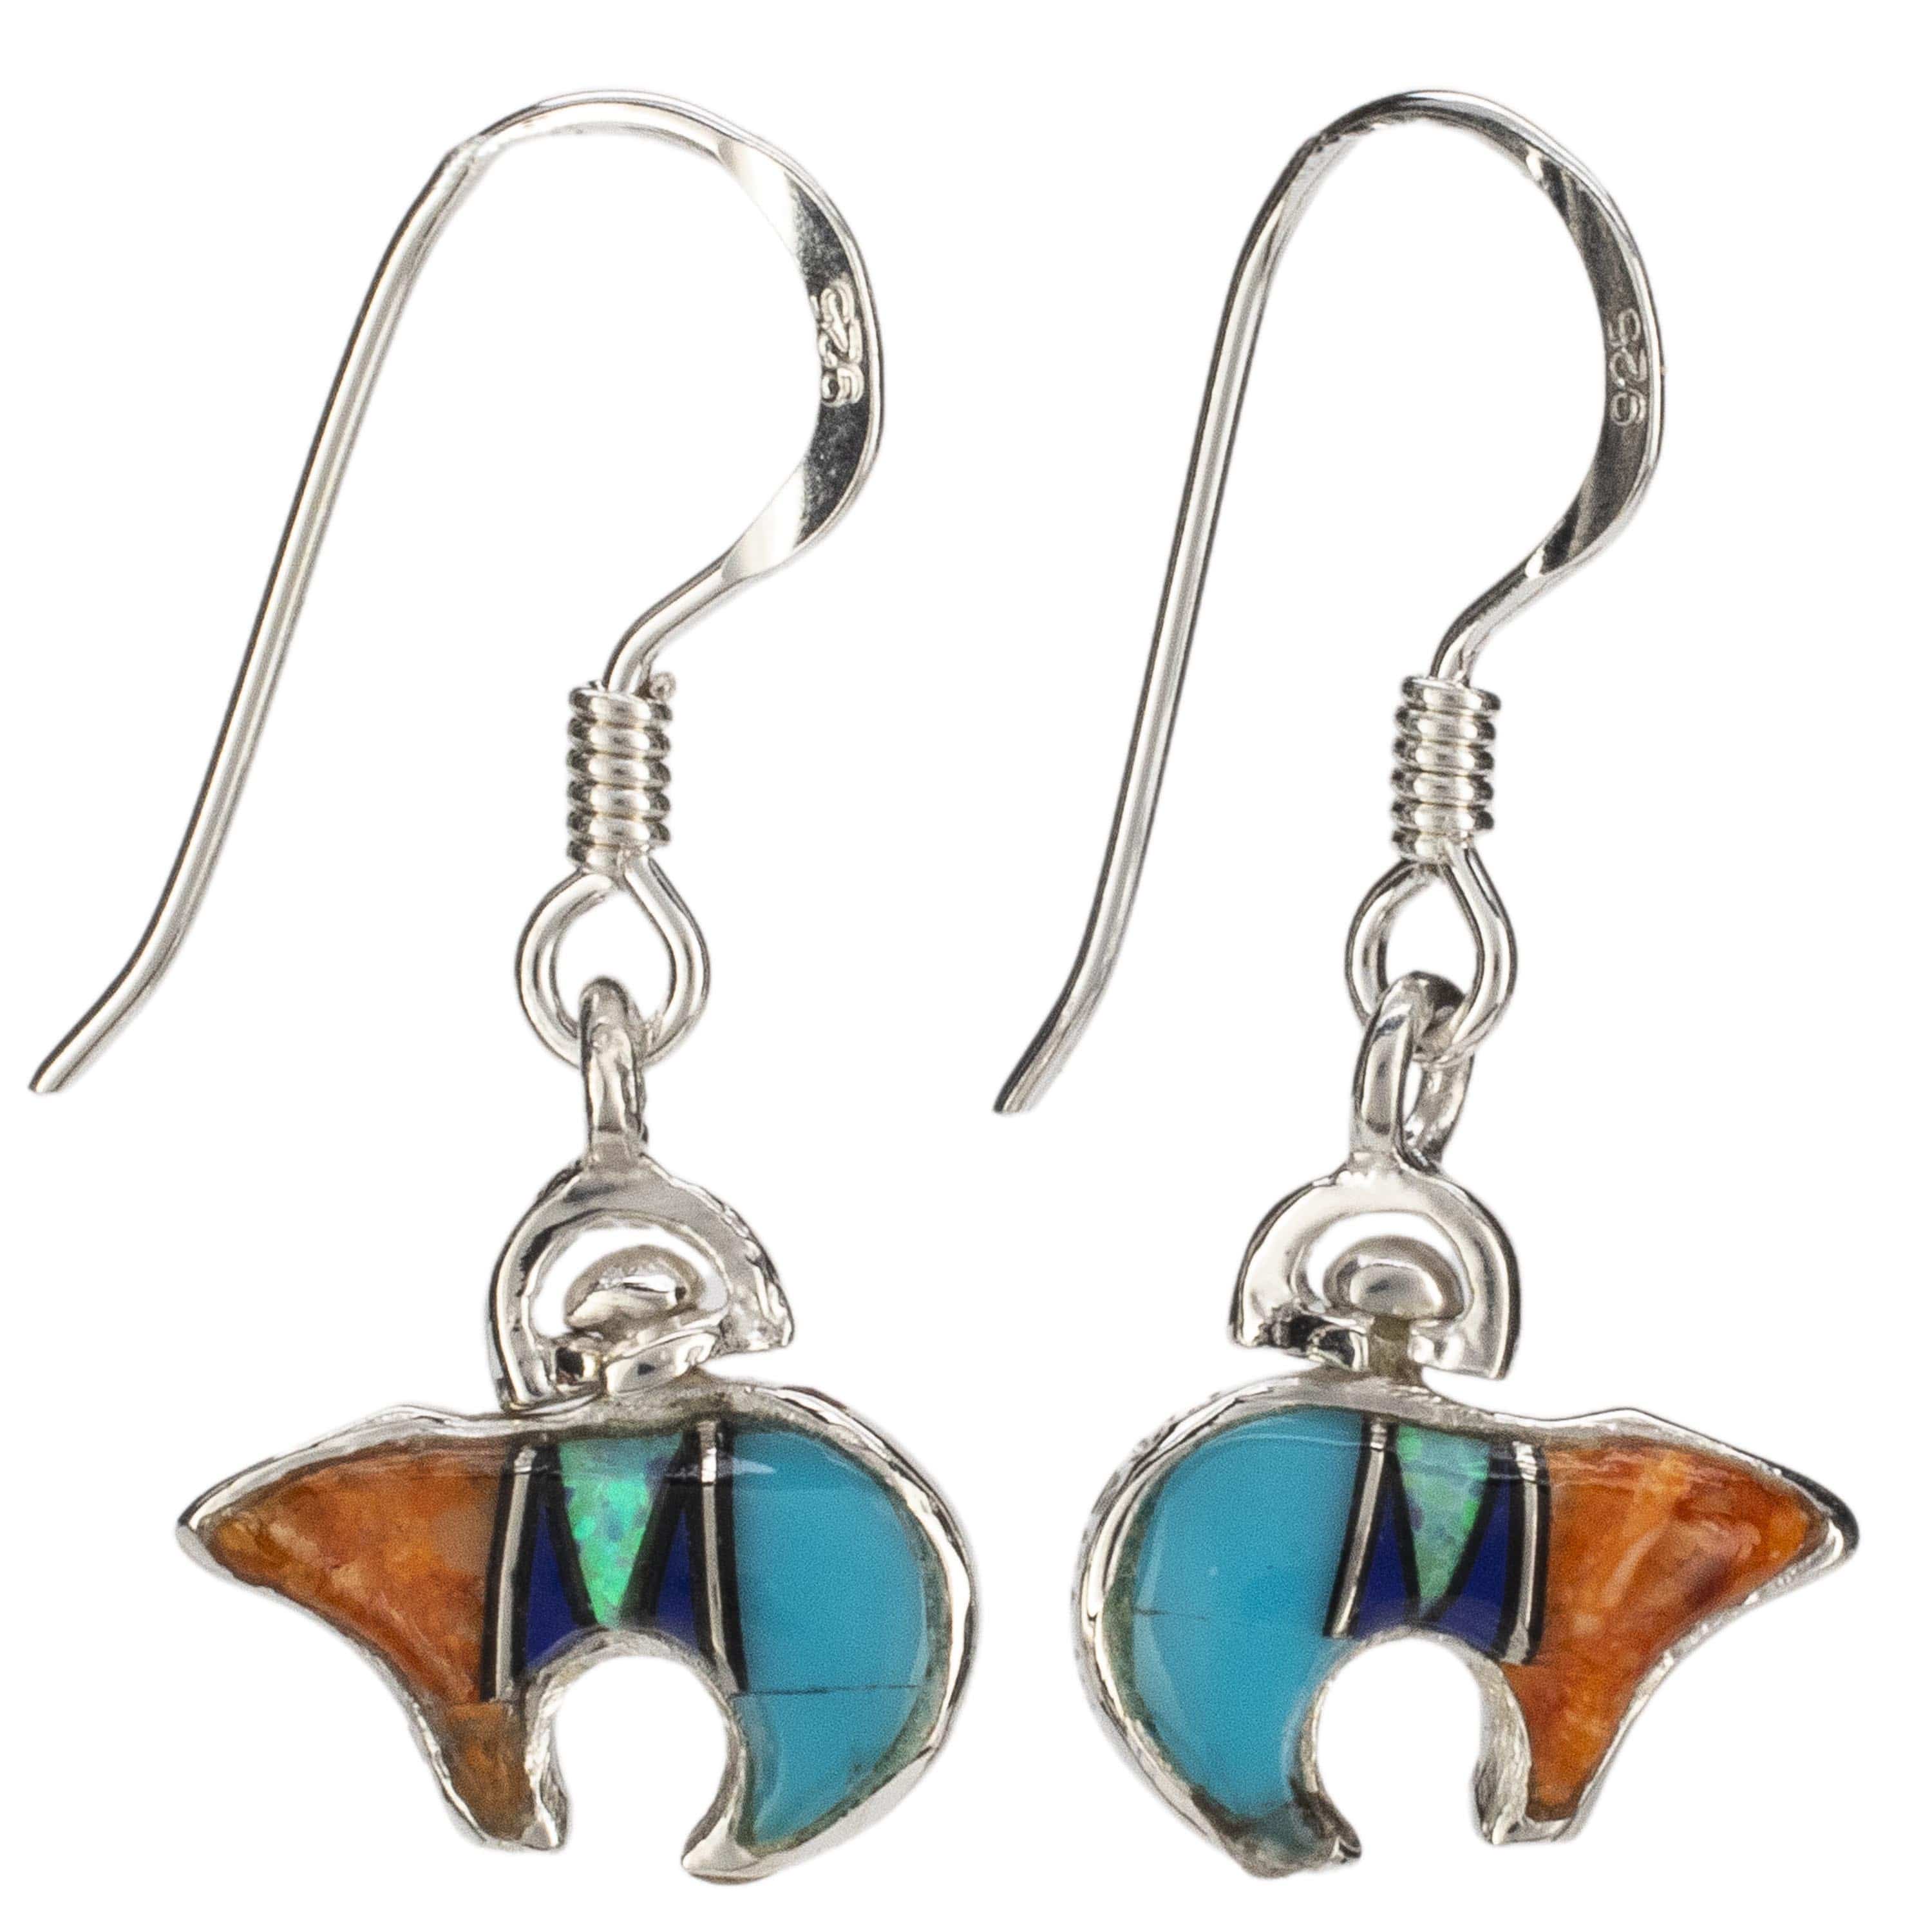 Kalifano Southwest Silver Jewelry Multi Gemstone Bear Earrings Handmade with Sterling Silver and Opal Accent NME.1129.MT